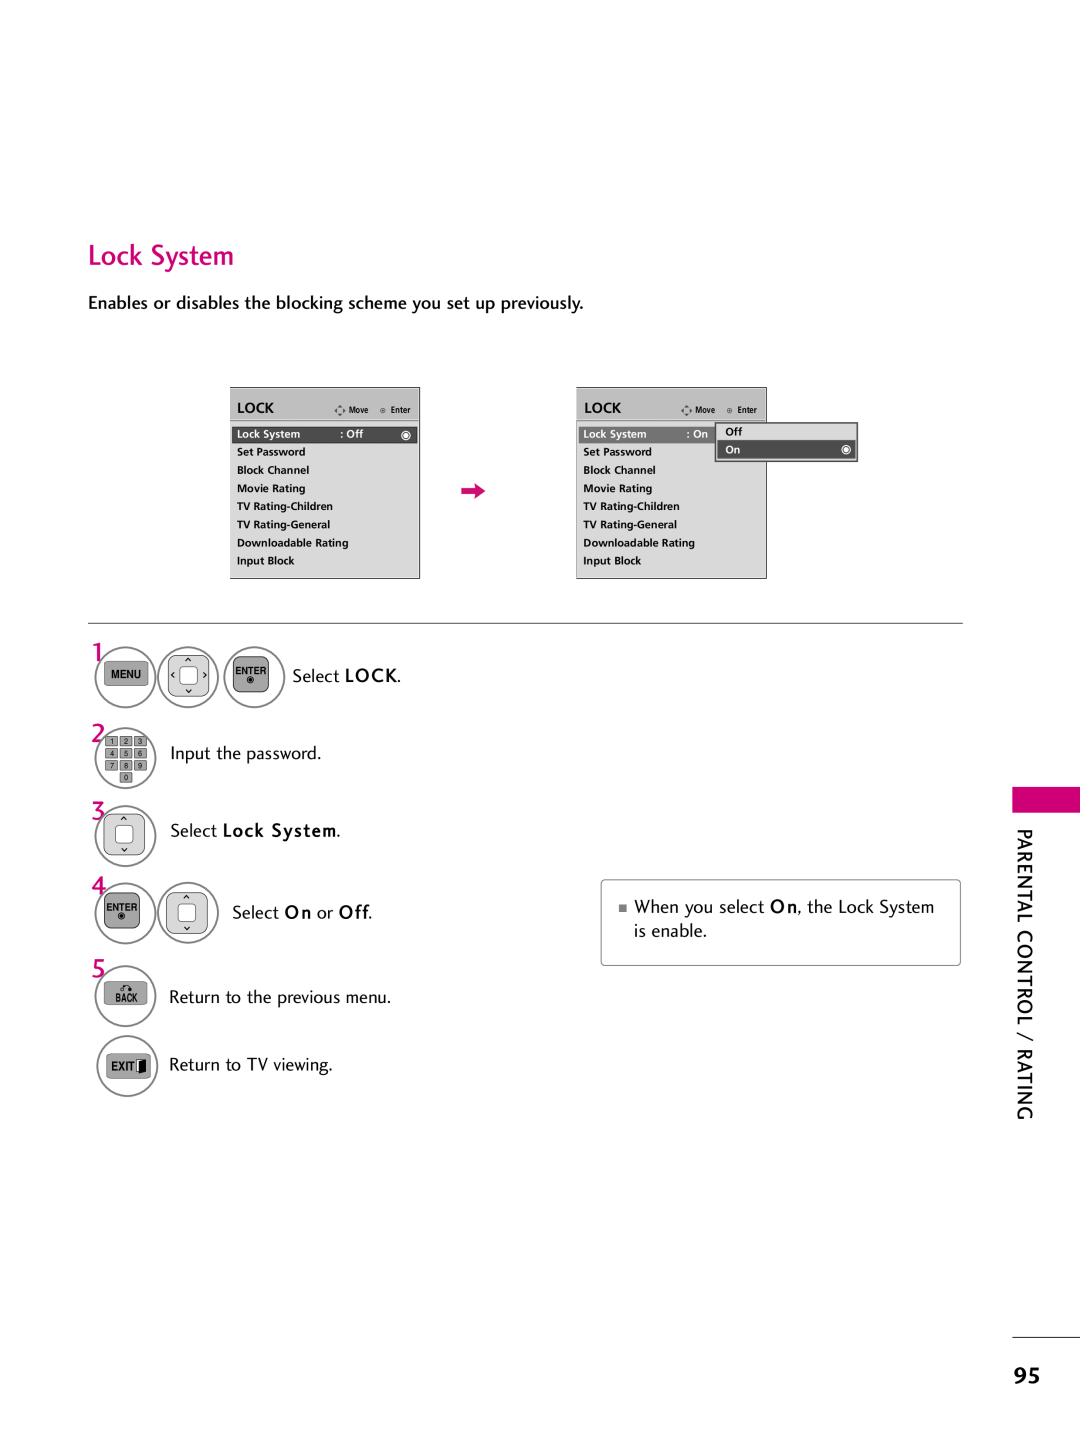 LG Electronics 50PK540, 50PJ250 Select O n or Off, When you select O n, the Lock System, Set Password, Enter, Move 